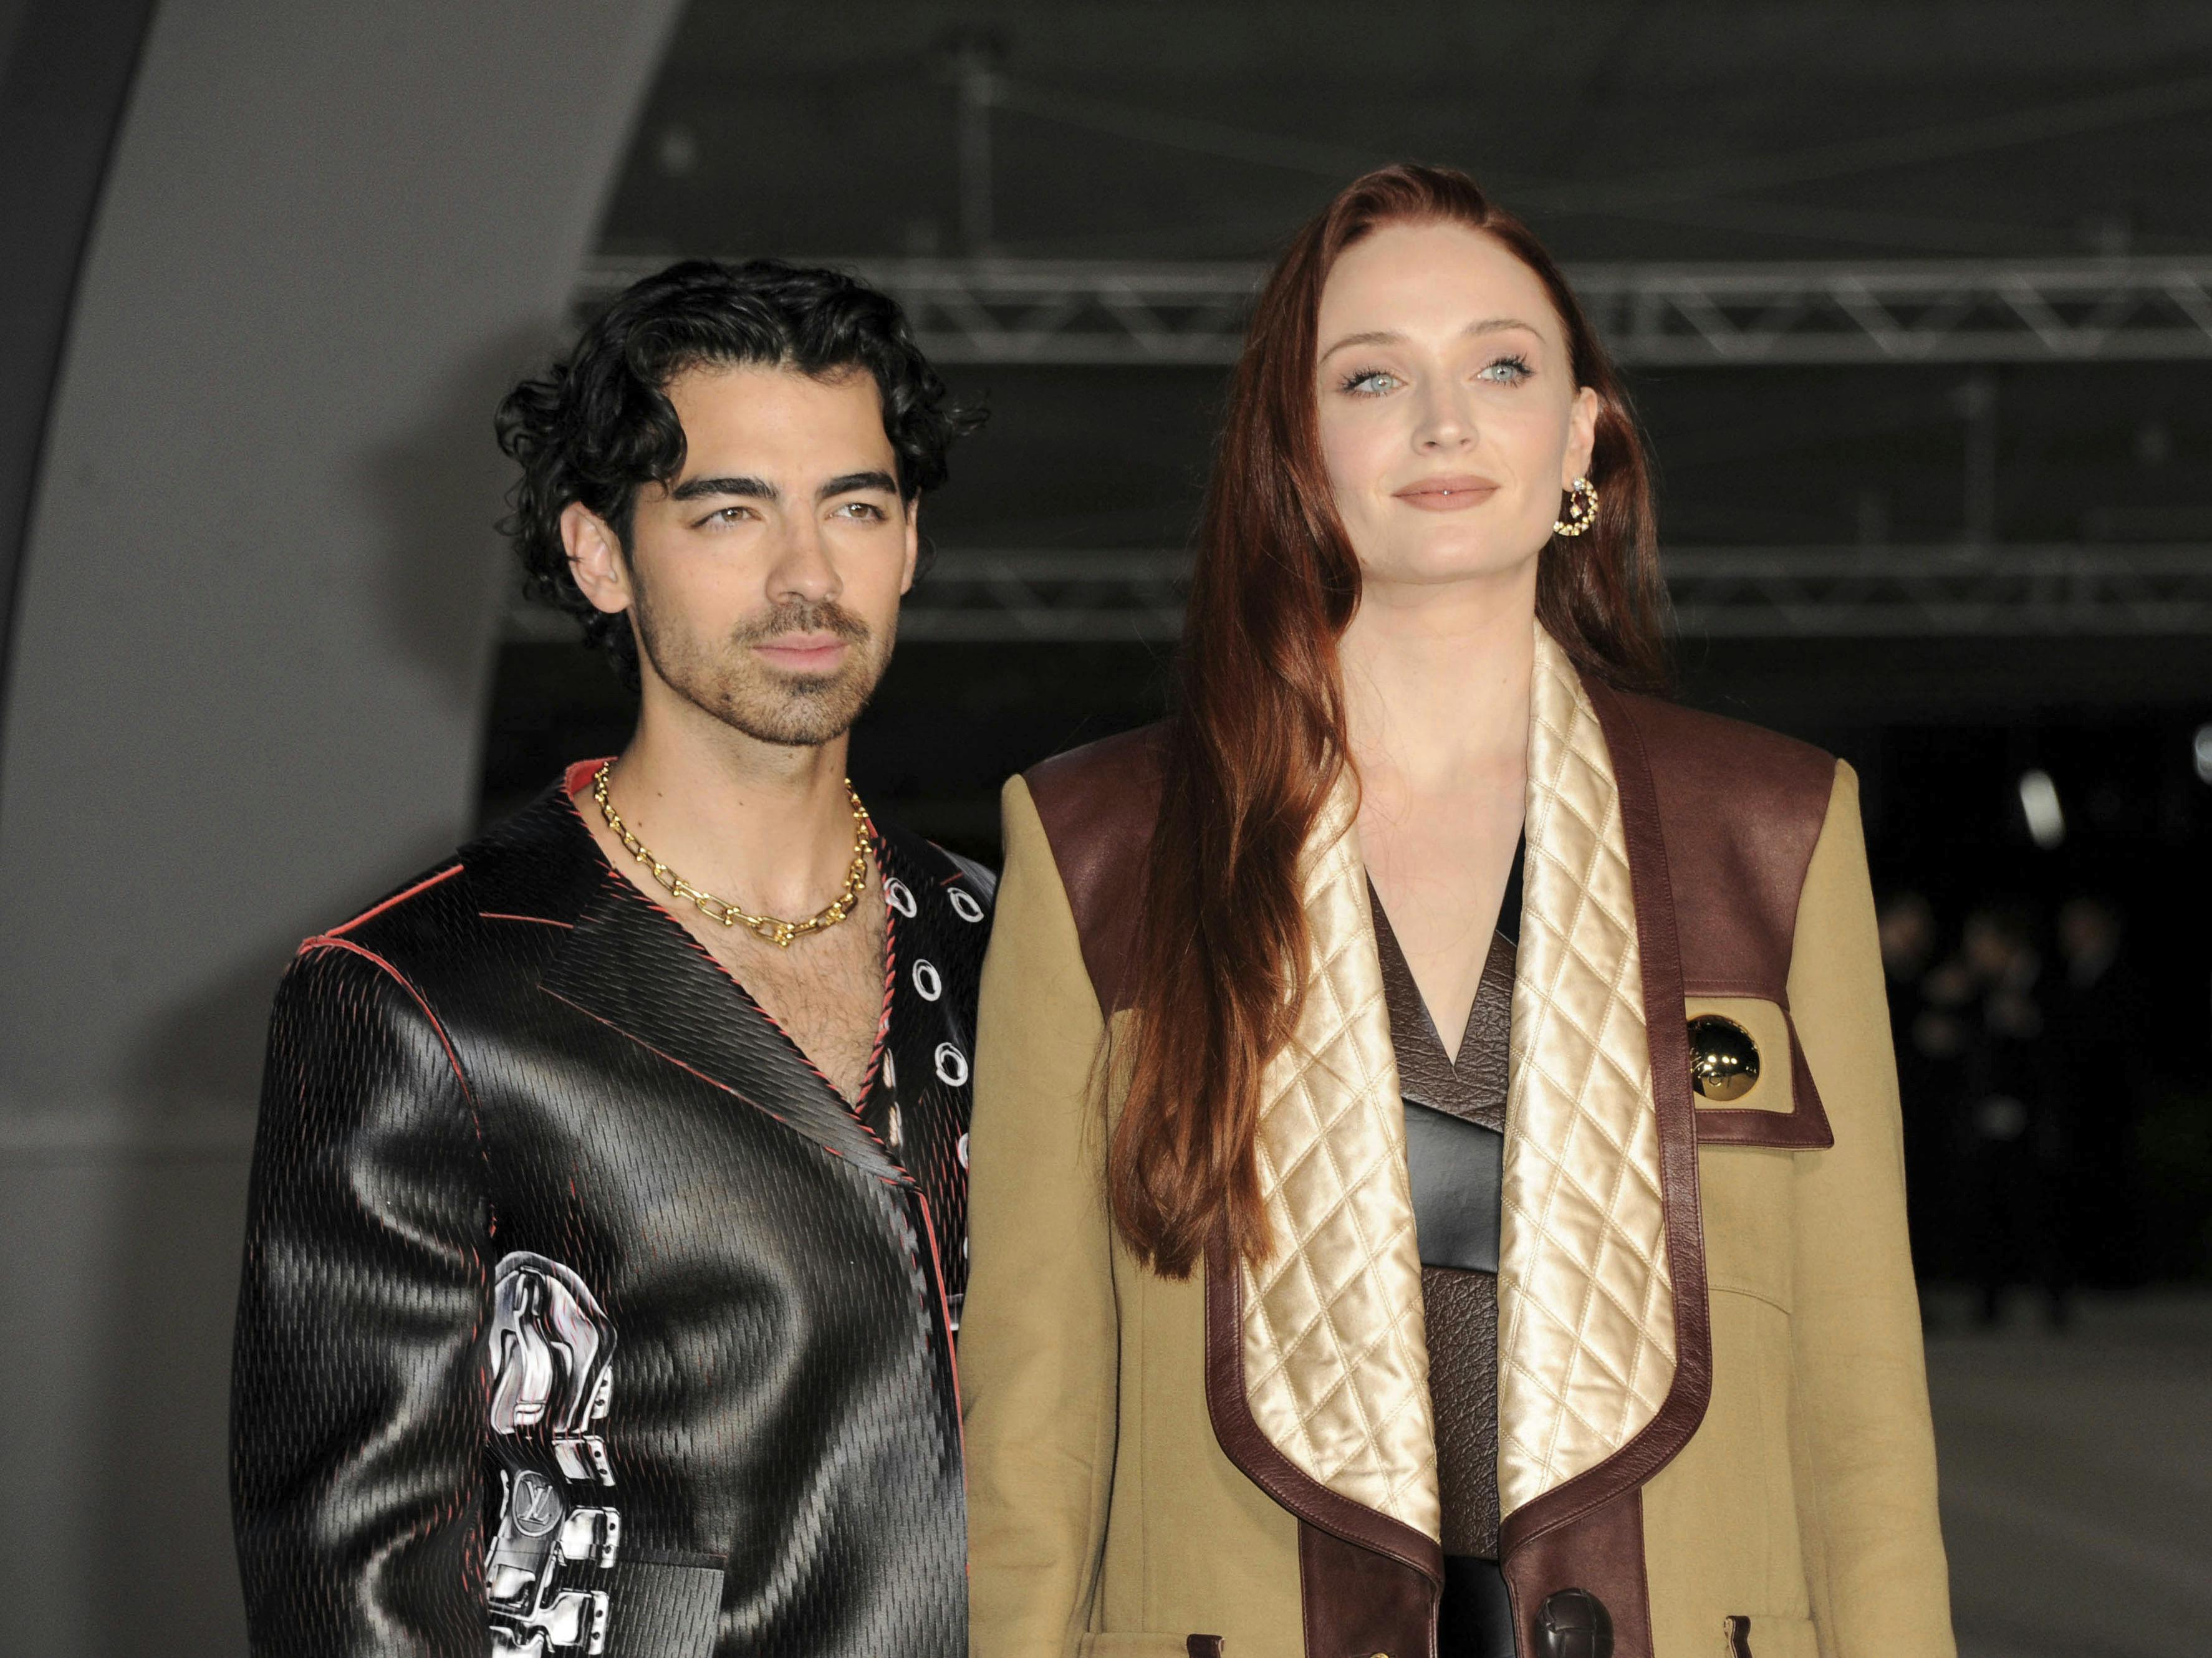 SEPTEMBER 6th 2023: Joe Jonas of The Jonas Brothers files for divorce from actress Sophie Turner after four years of marriage. - File Photo by: zz/Alexandra Picco/STAR MAX/IPx 2022 10/15/22 Joe Jonas and Sophie Turner at The Academy Museum of Motion Pictures 2nd Annual Gala held on October 15, 2022 at The Academy Museum of Motion Pictures in Los Angeles, California.